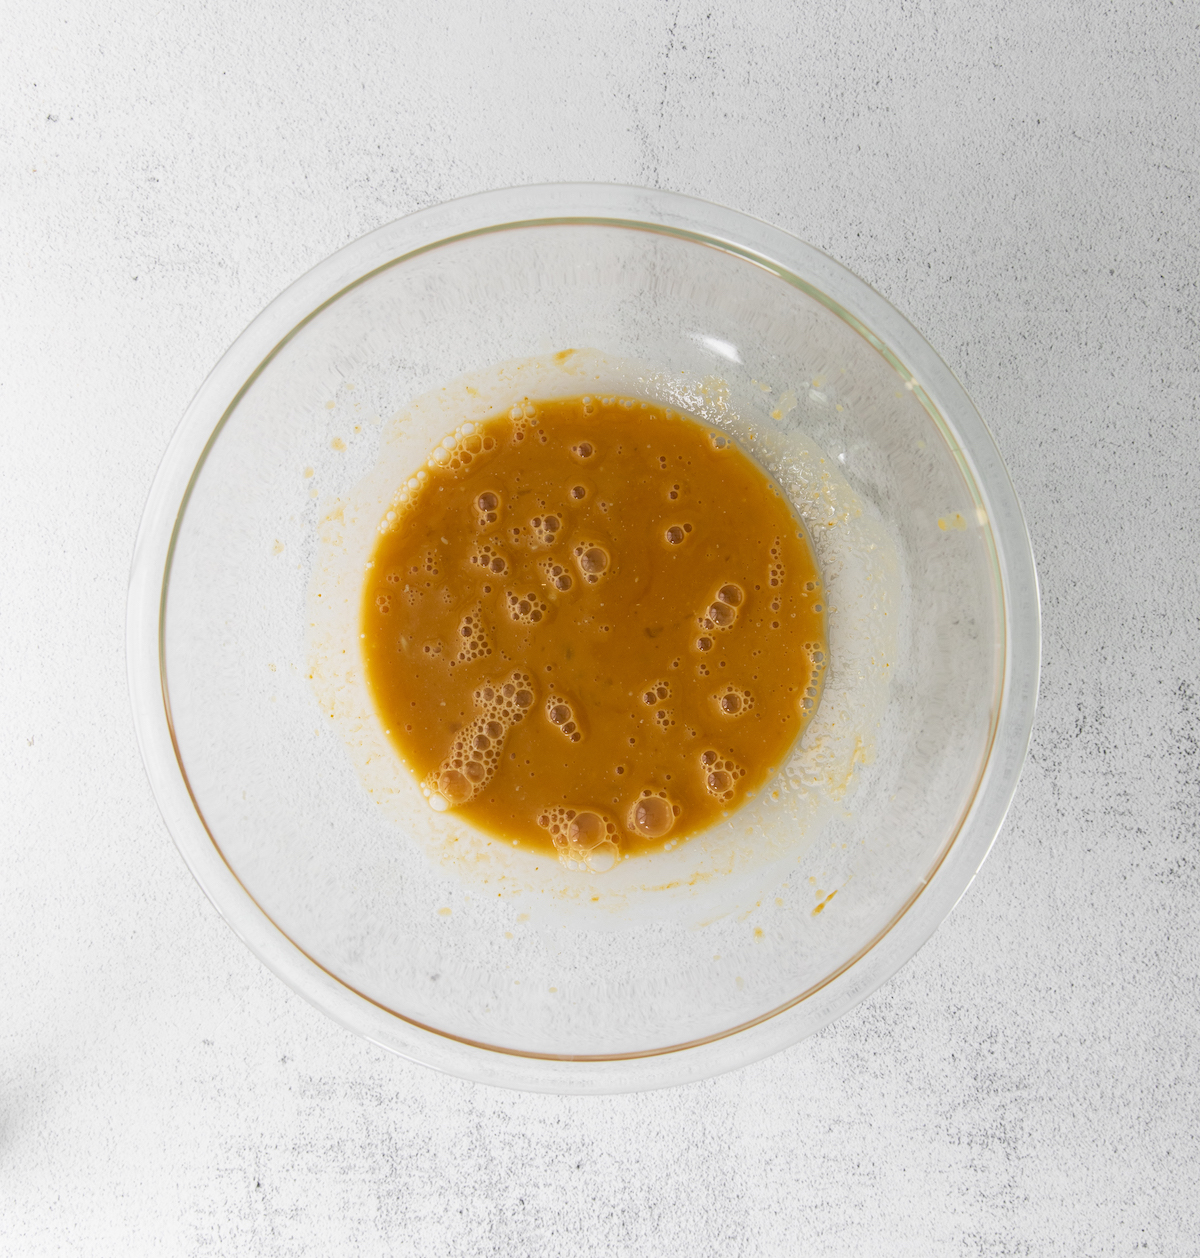 Pumpkin puree added to the yeast mixture